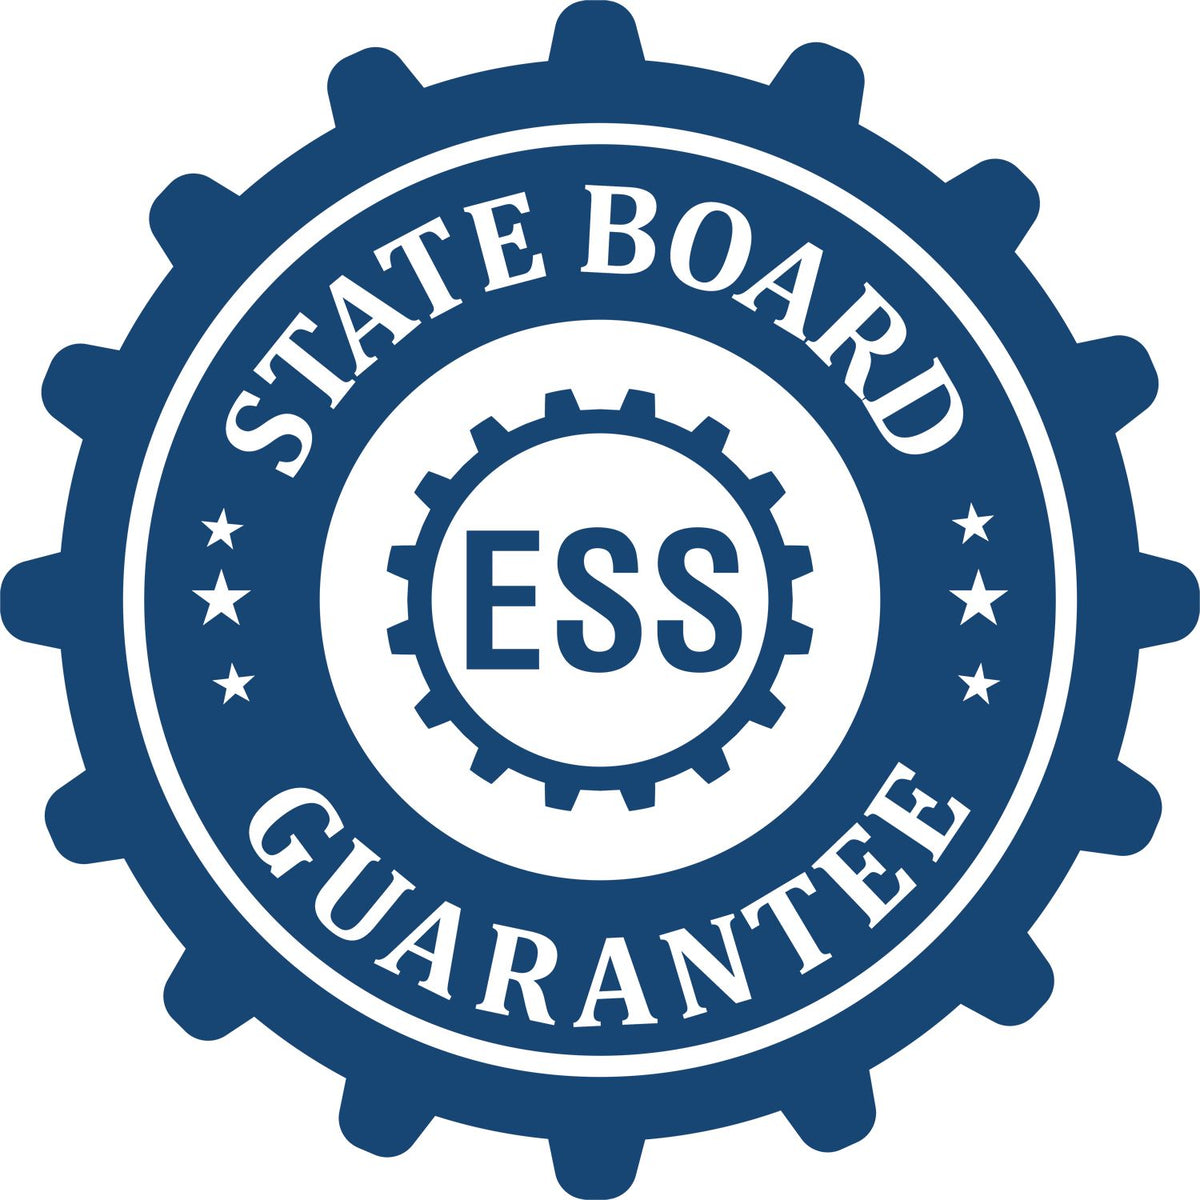 An emblem in a gear shape illustrating a state board guarantee for the Digital Nebraska Landscape Architect Stamp product.